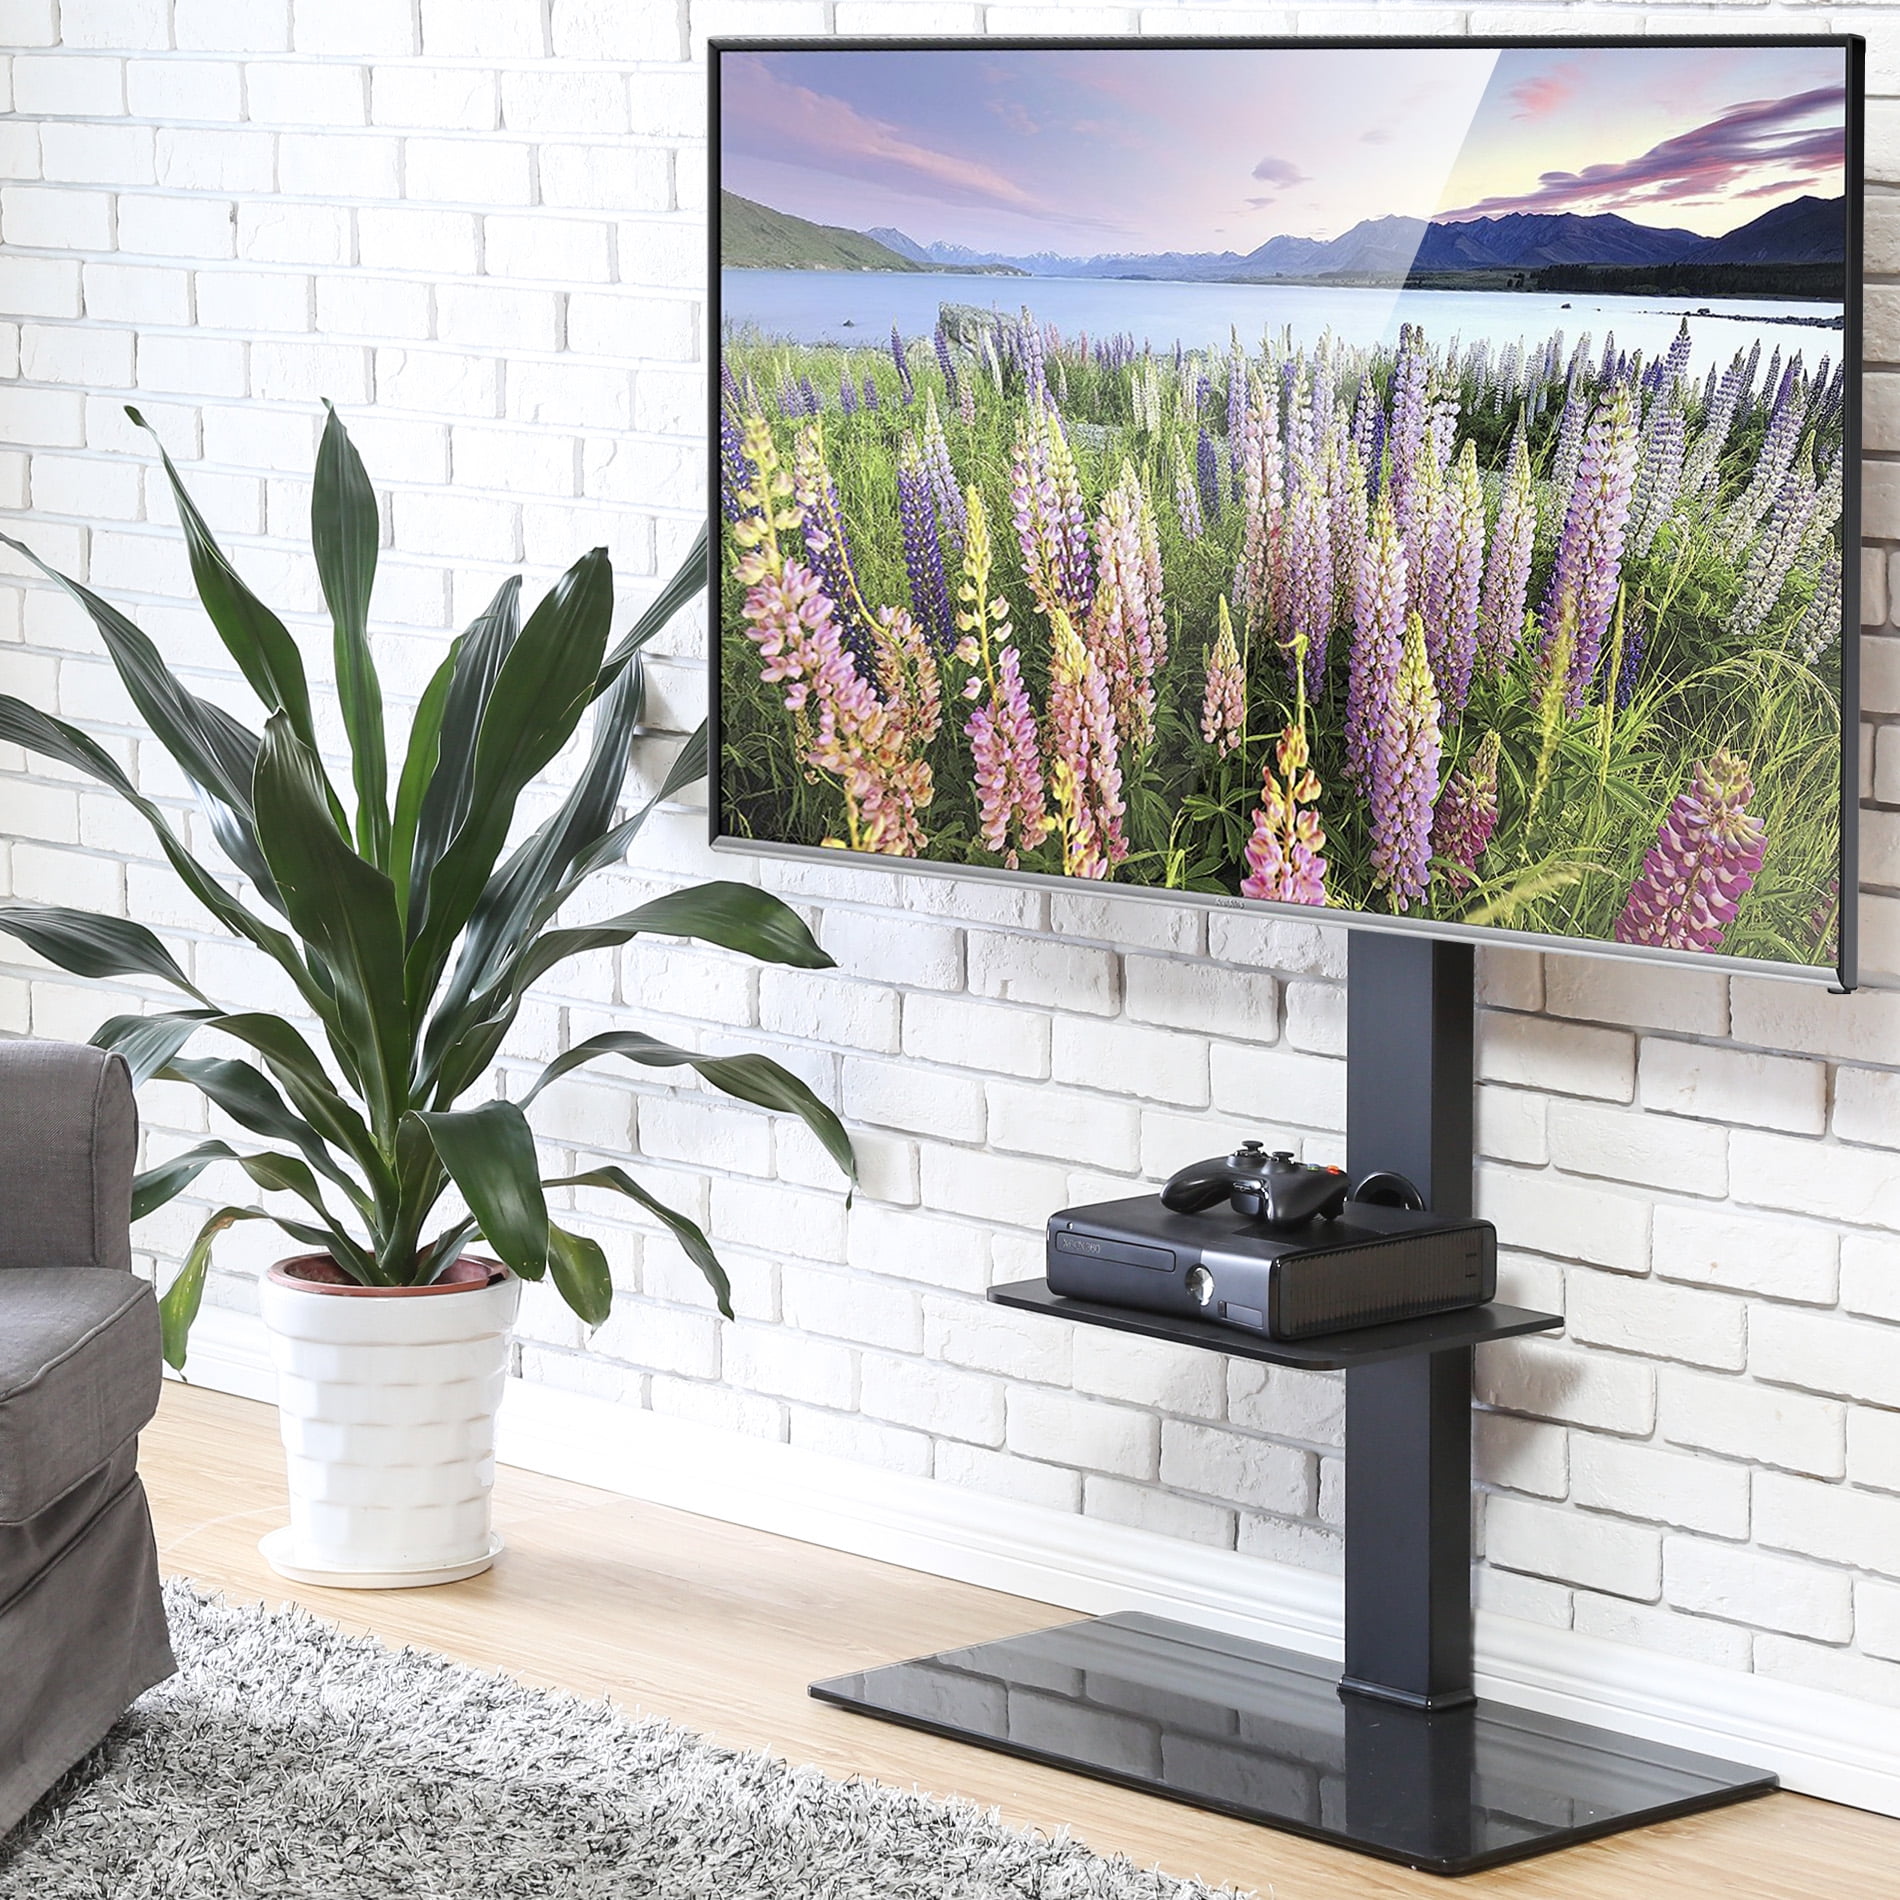 FITUEYES Swivel Cantilever TV Stand with Shelf for 50-80 Inch LCD LED Flat Screen TT208001MB 